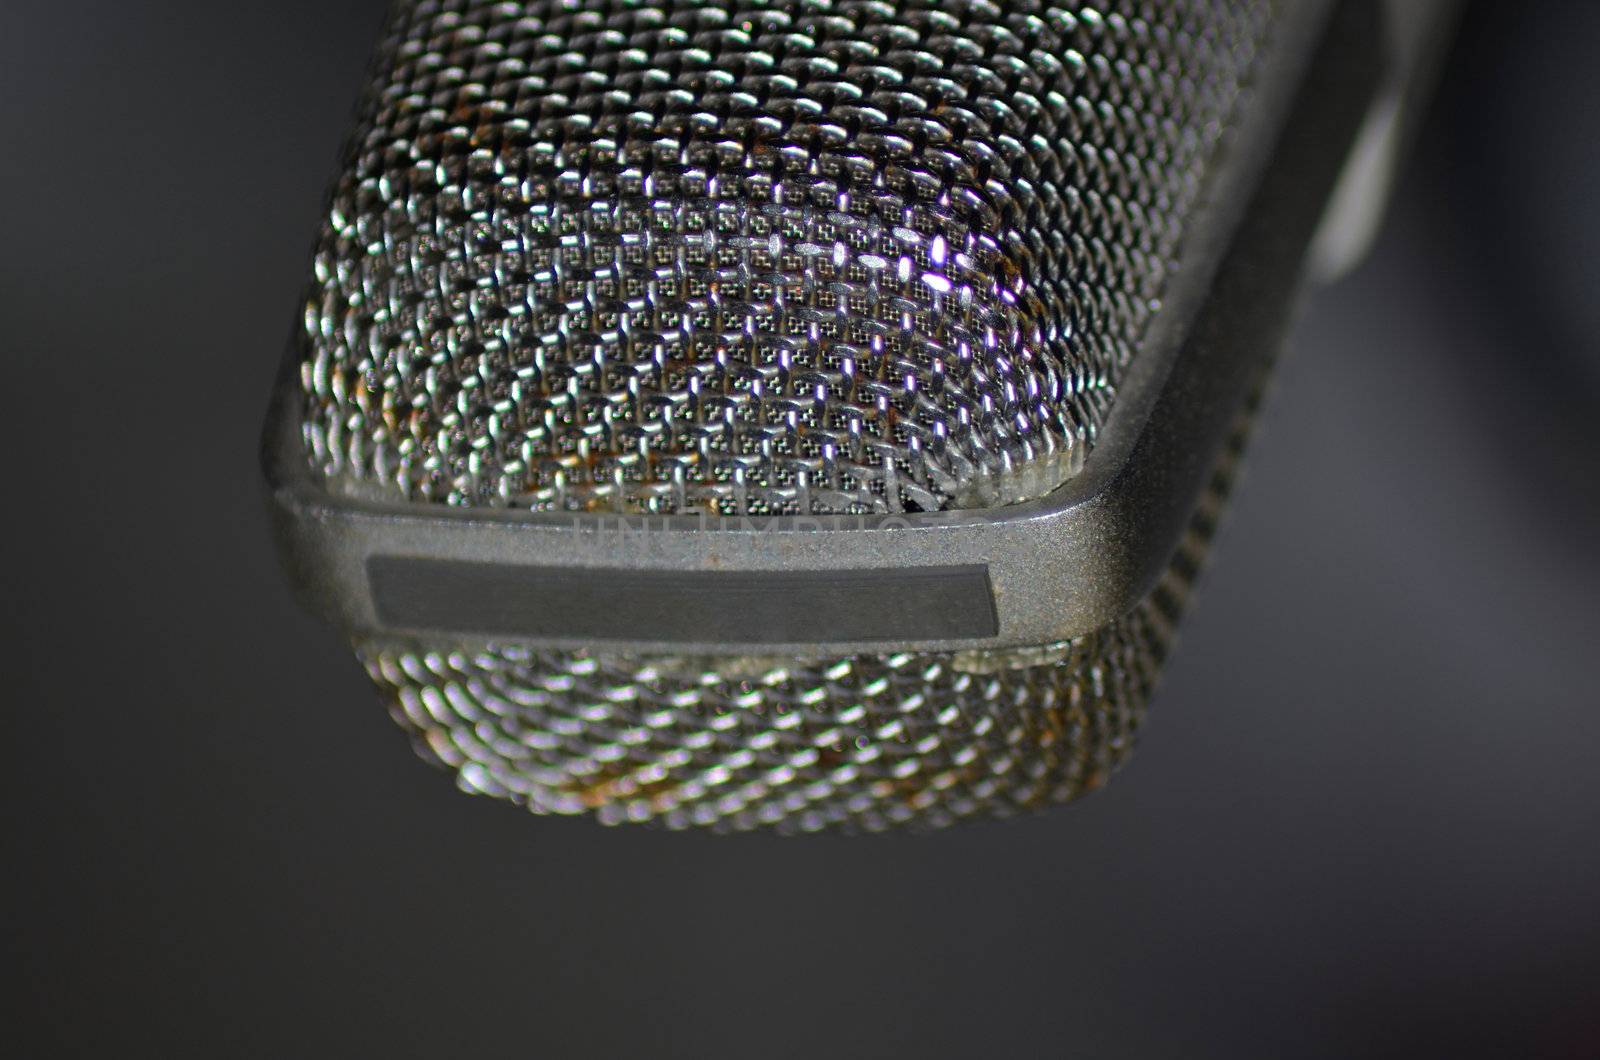 Old 50s microphone by Mbatelier